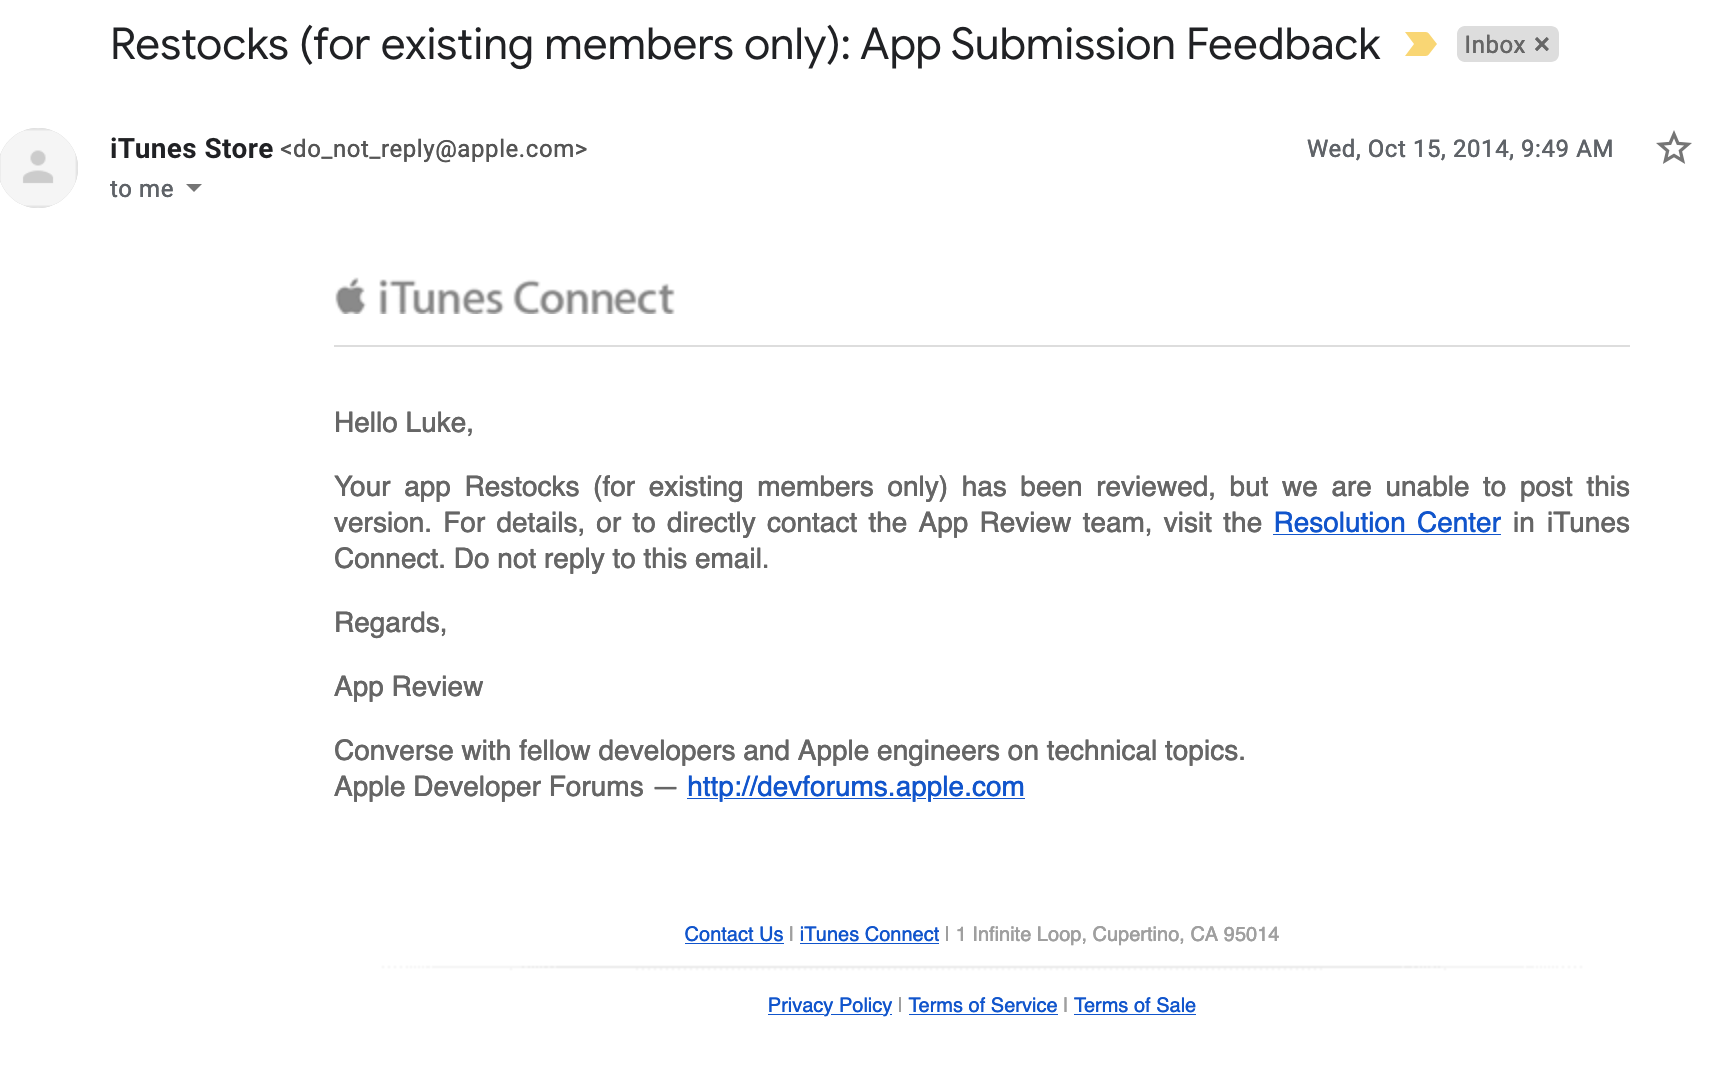 Apple’s “feedback” for me